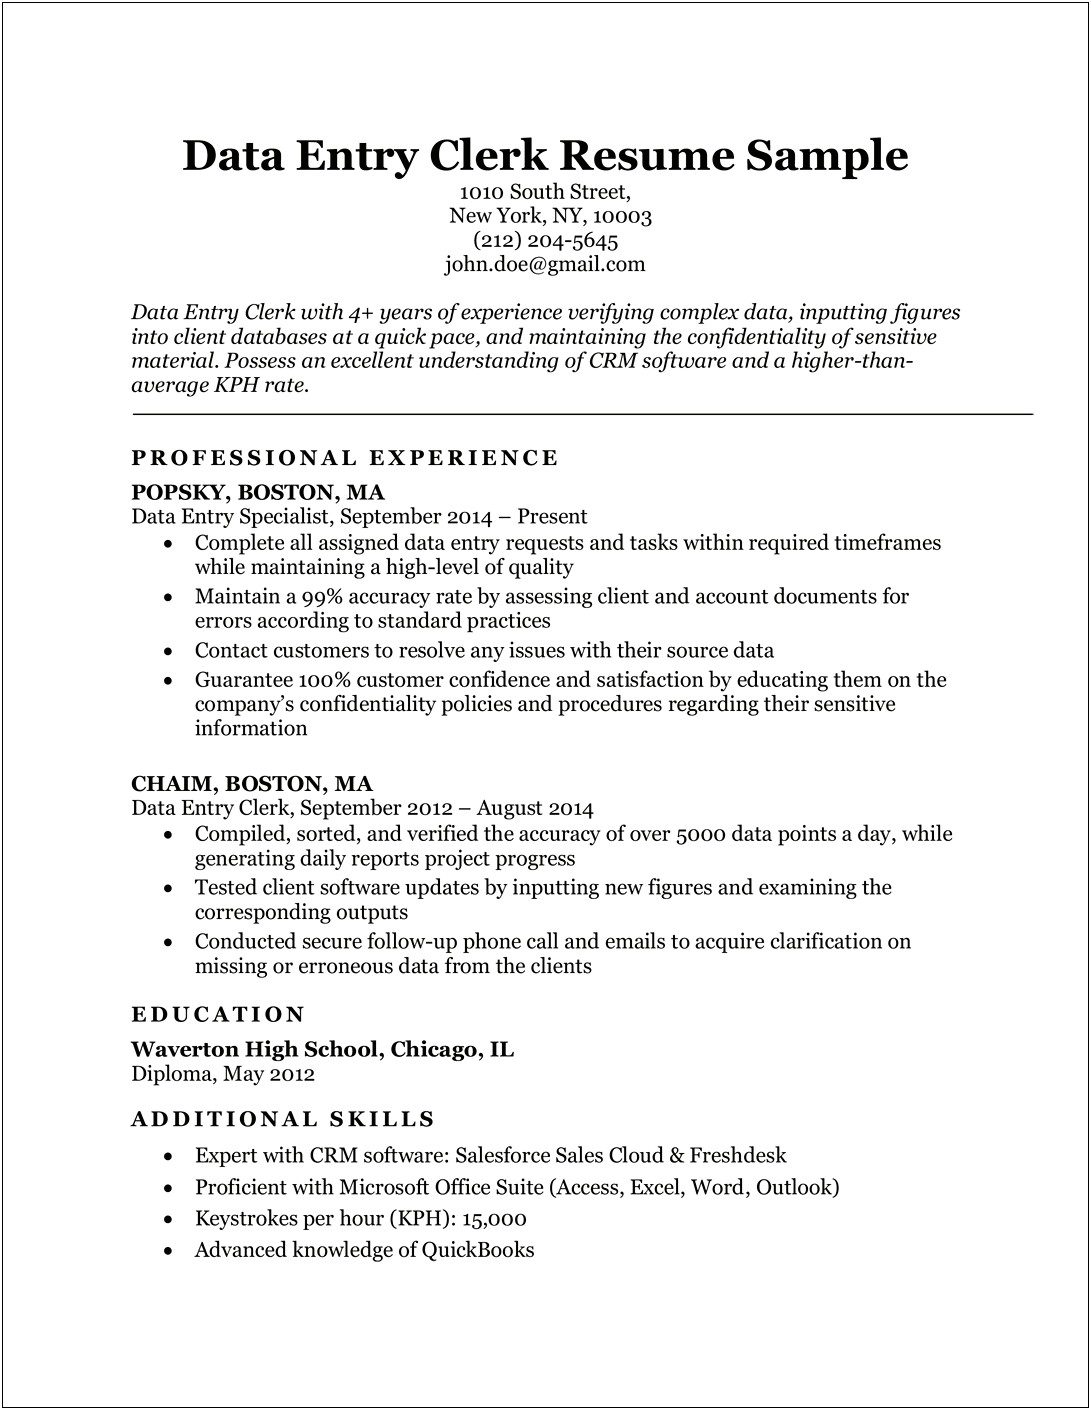 Microsoft Office Suite Skills For Resume